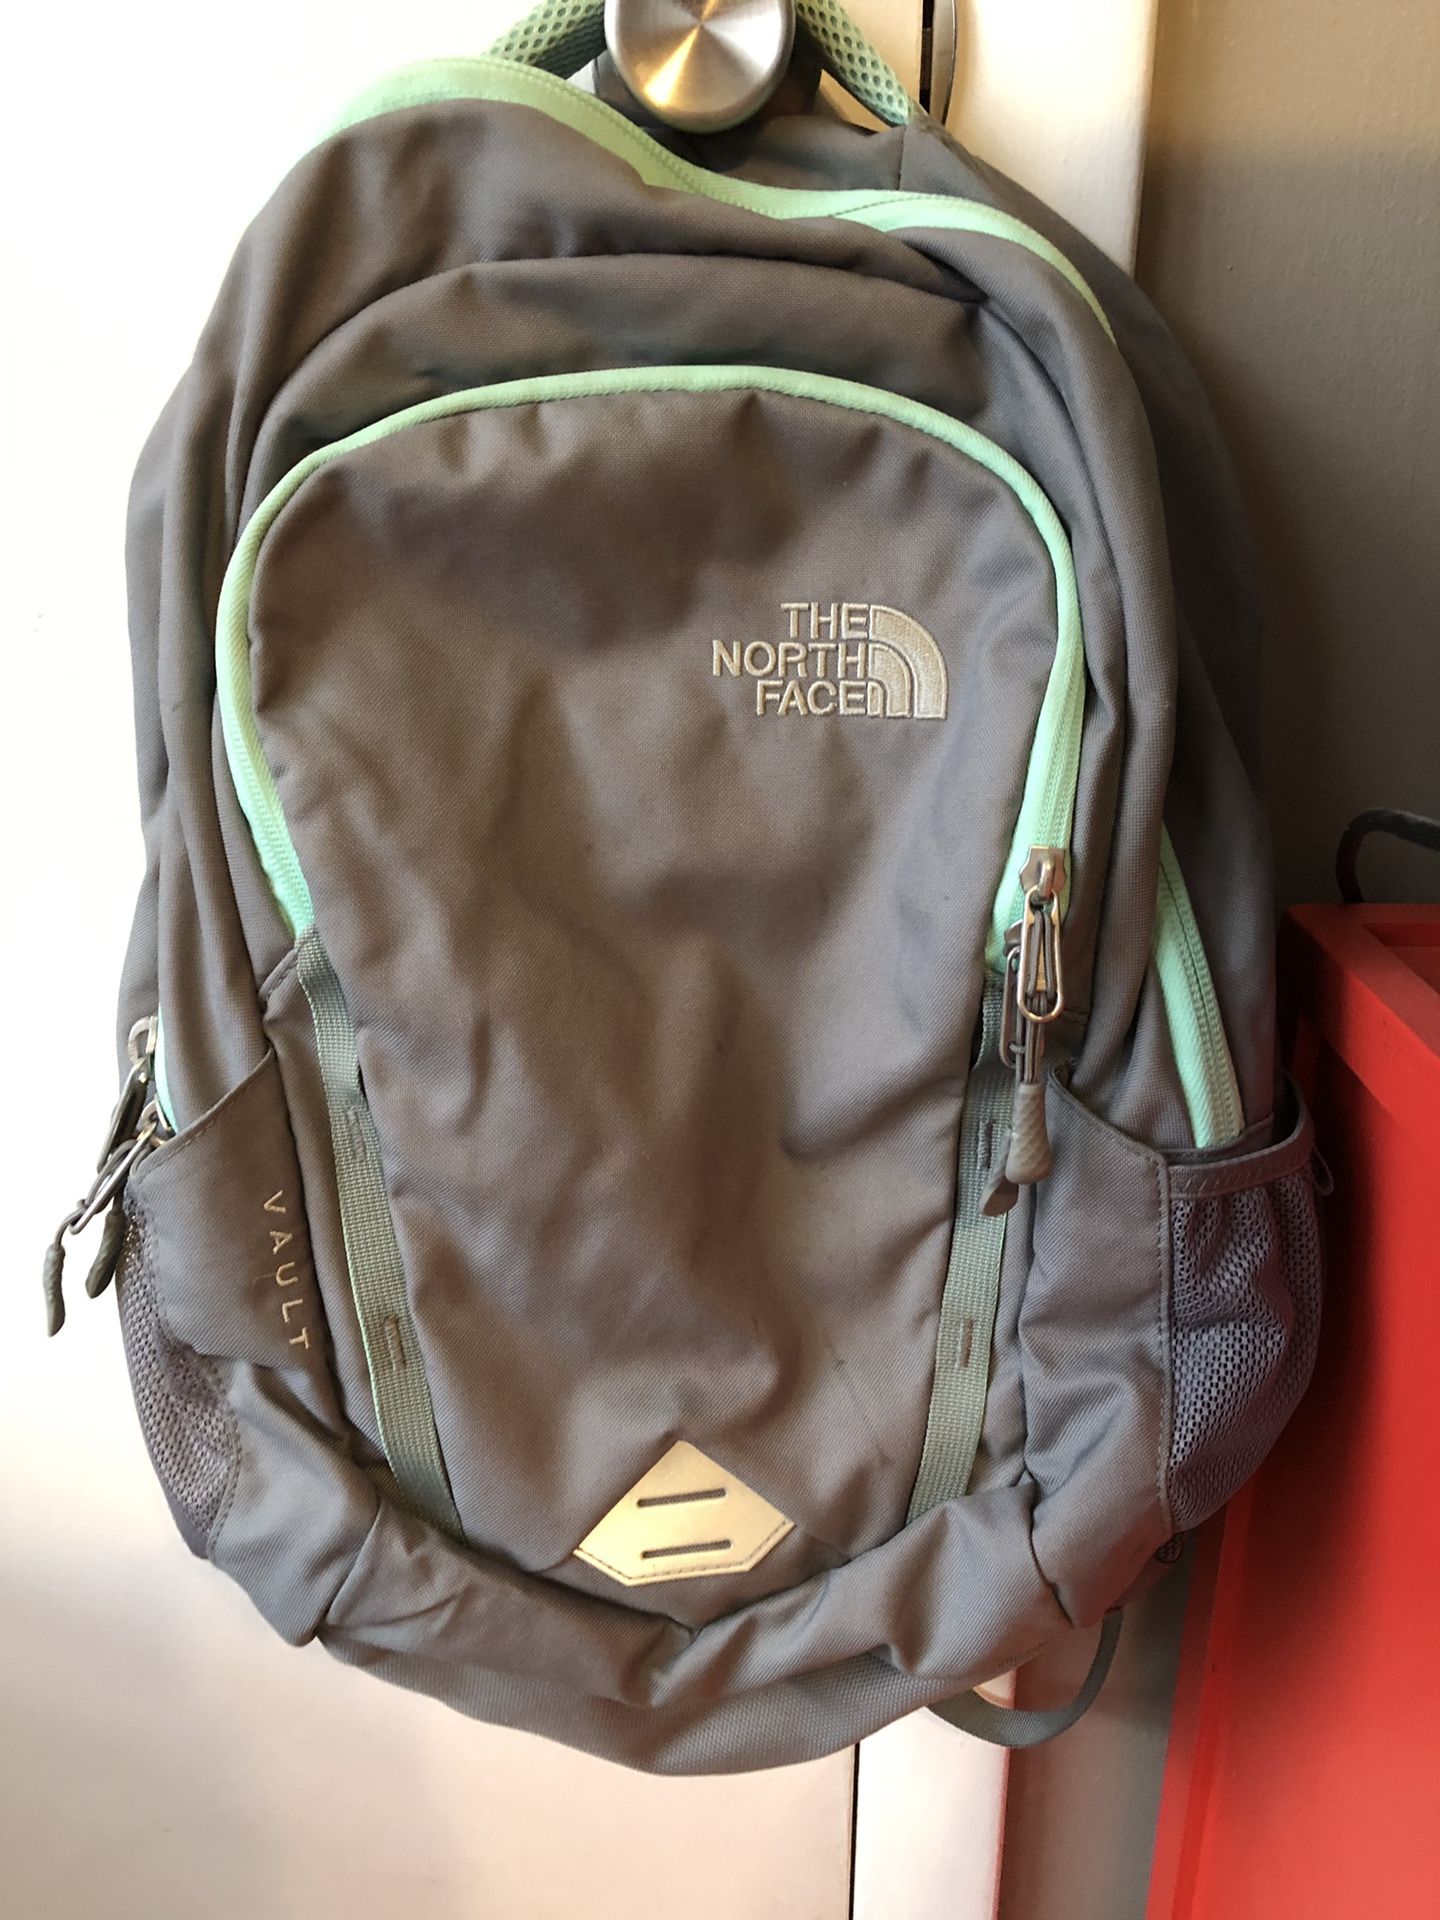 The north face book bag